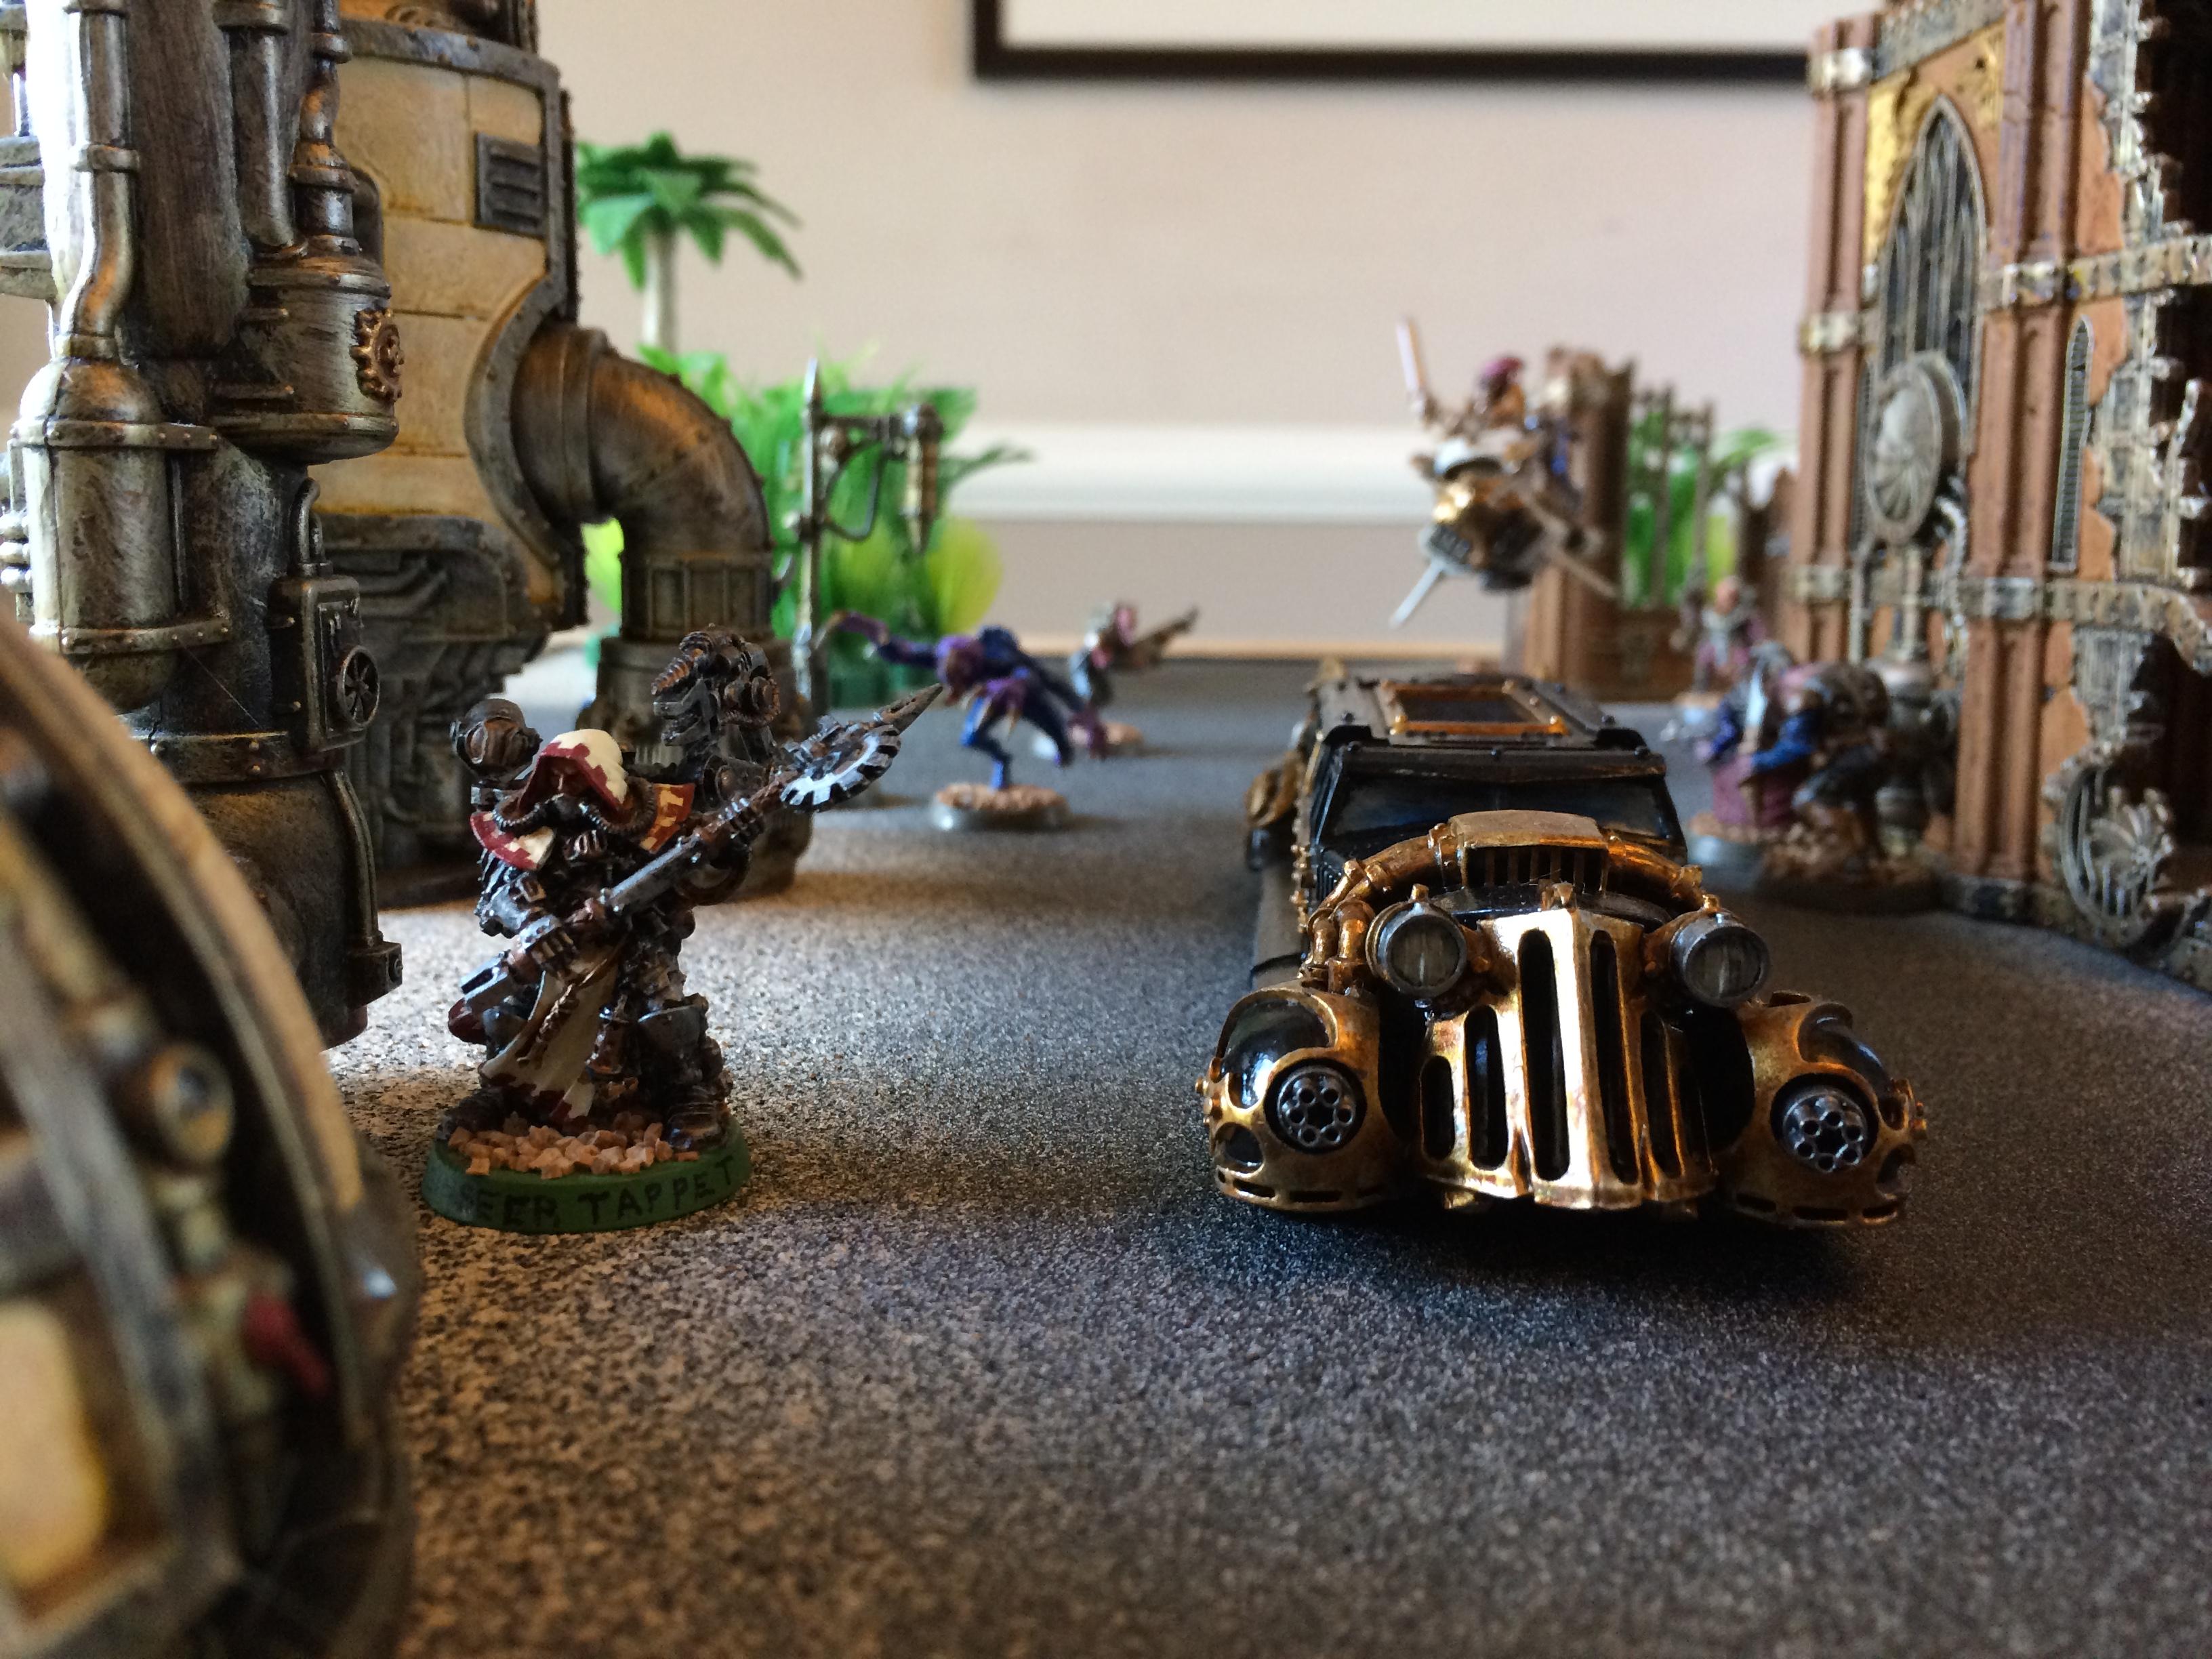 Enginseer Tappet destroys the limo with his servo-arm